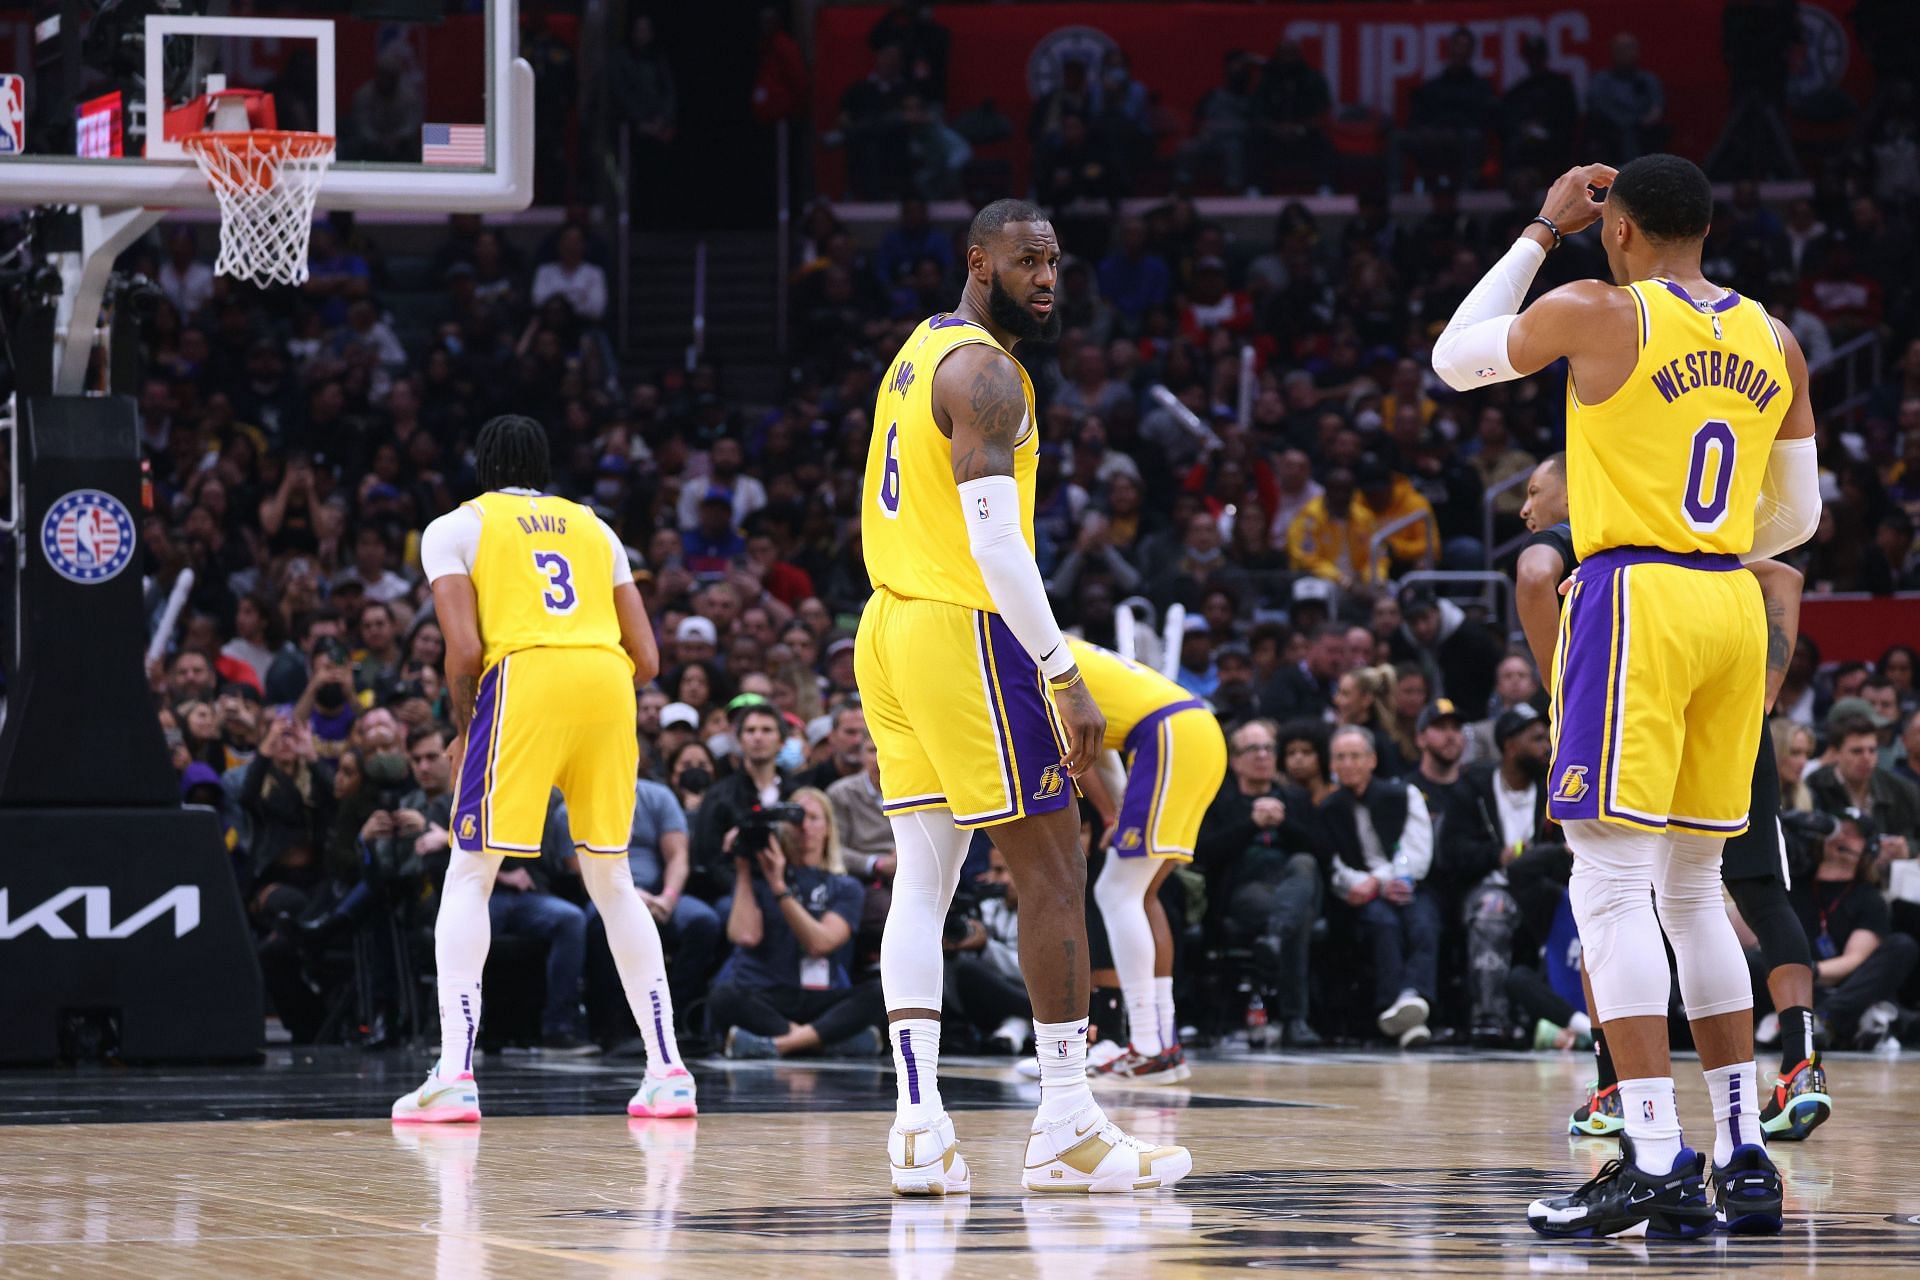 Anthony Davis of the LA Lakers shoots a free throw in front of LeBron James and Russell Westbrook.